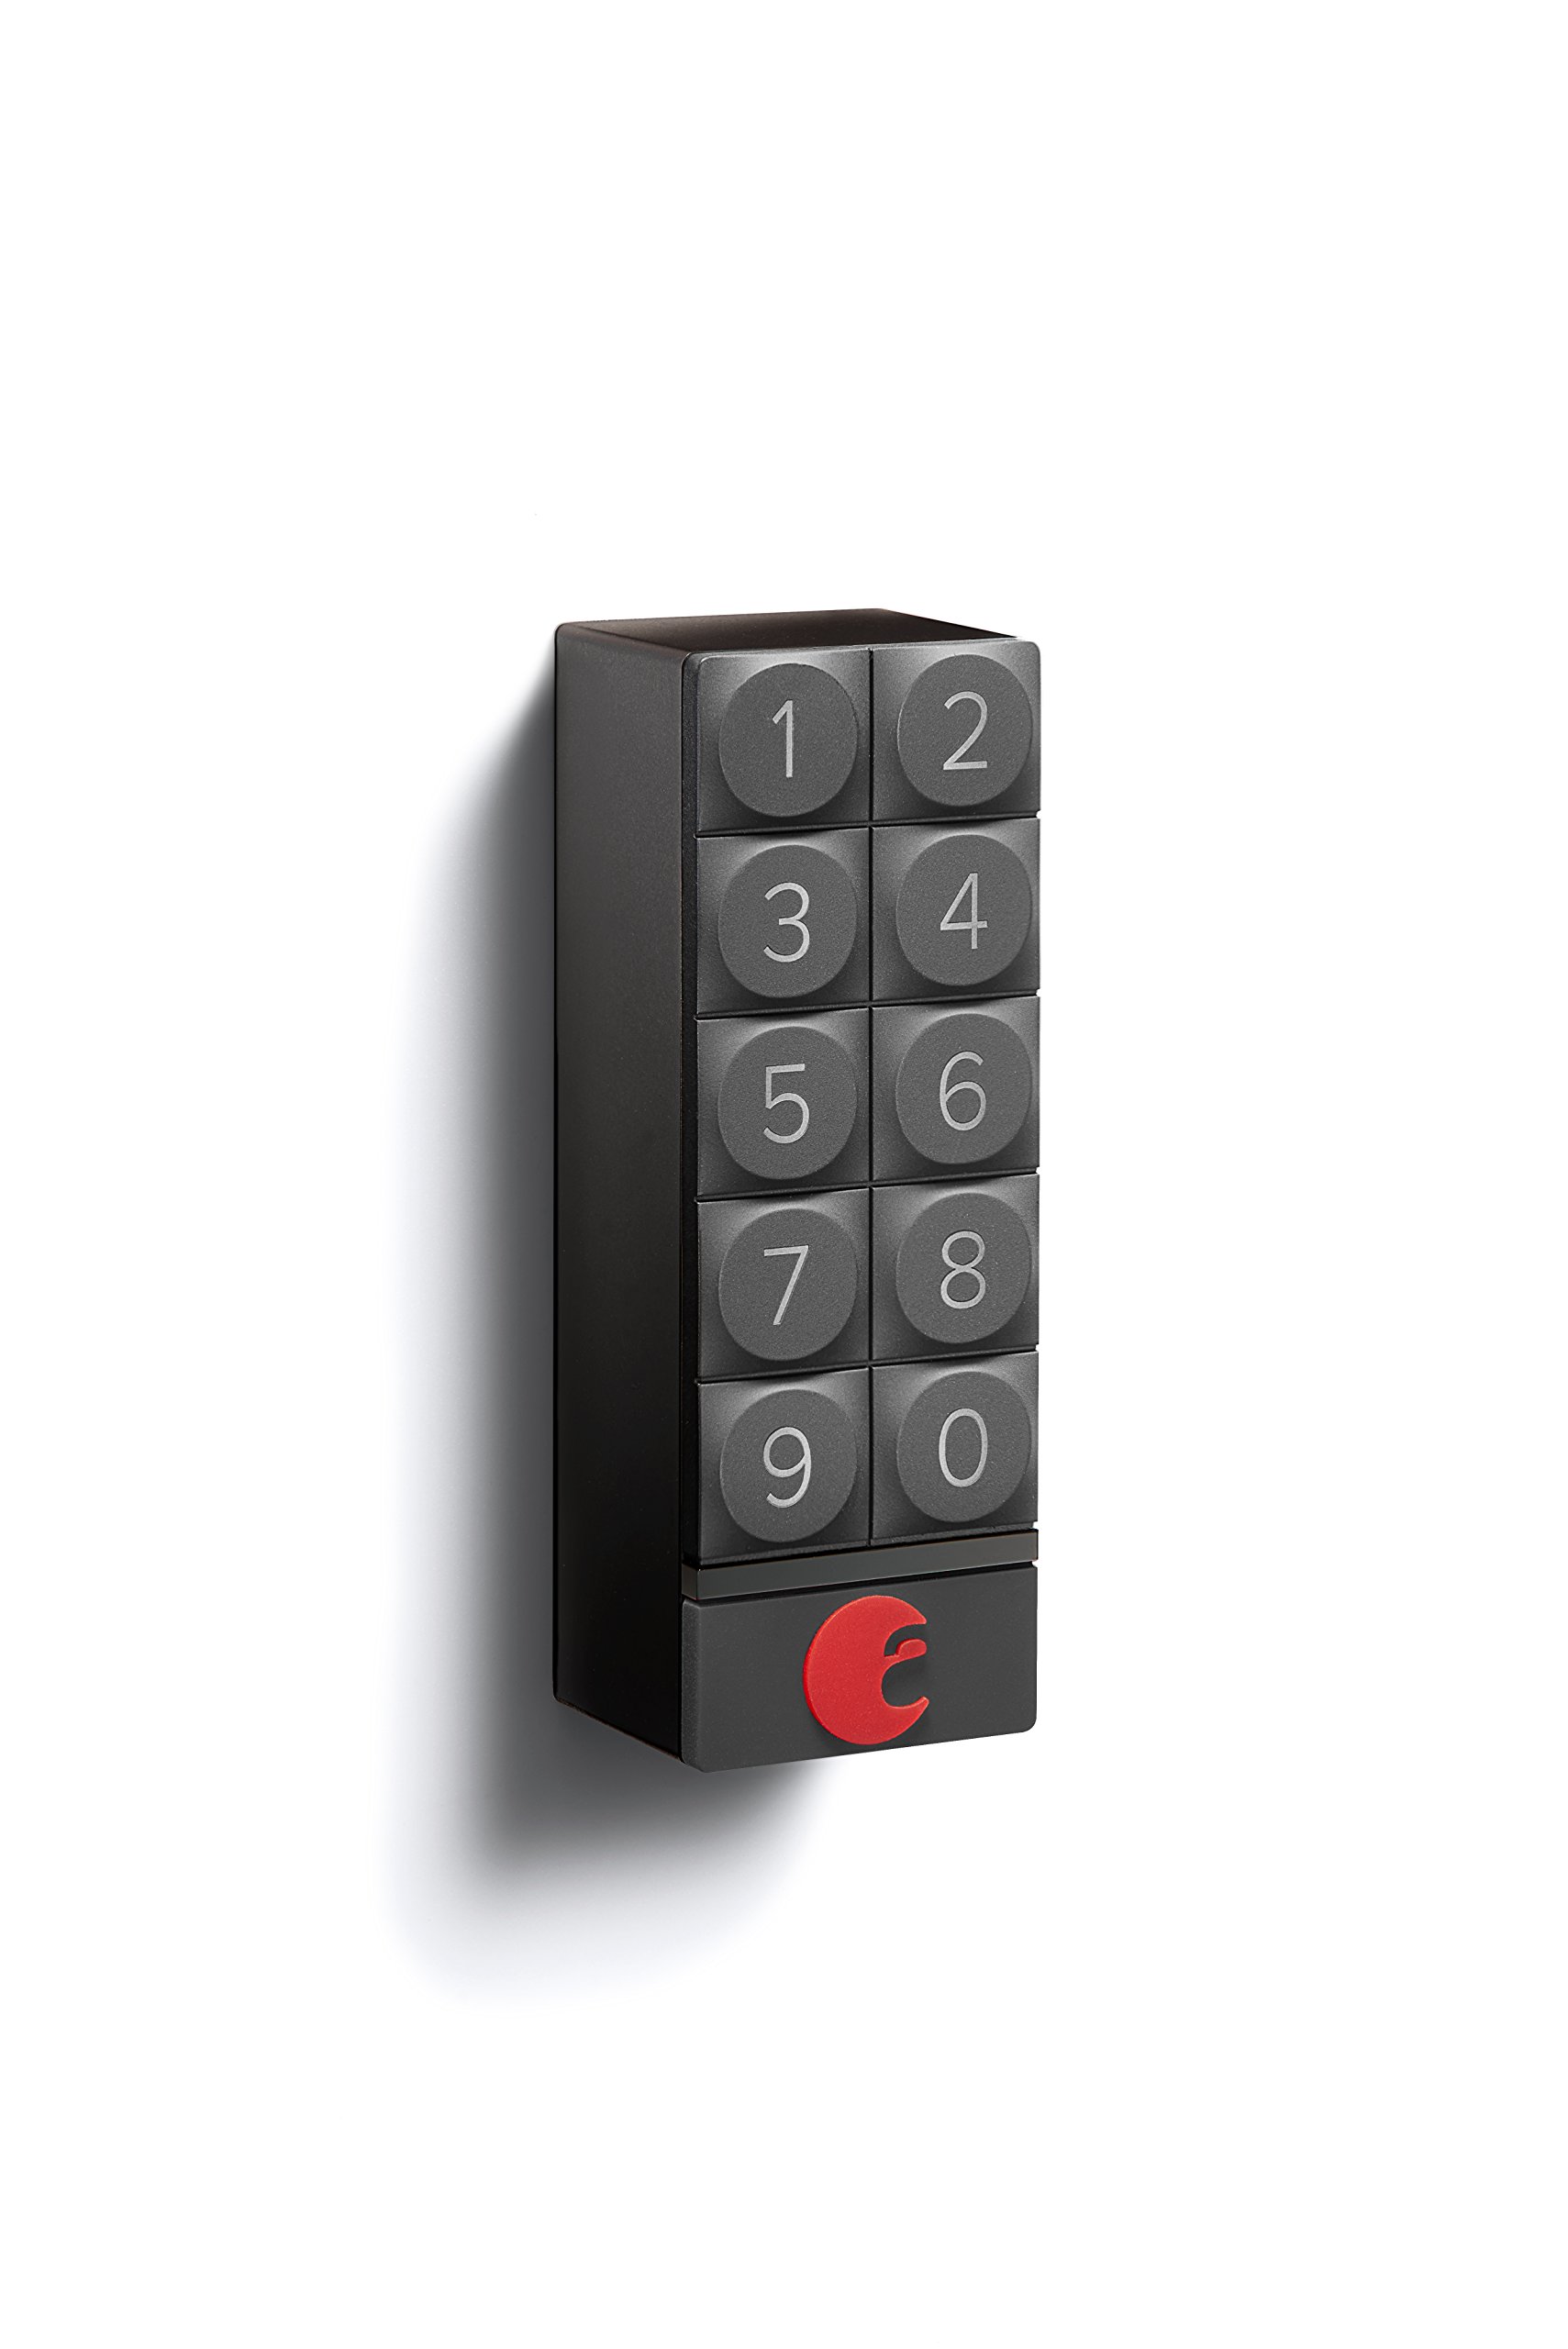 August Home Smart Keypad, Pair with Your August Smart Lock - Grant Guest Access with Unique Keycodes, Dark Gray